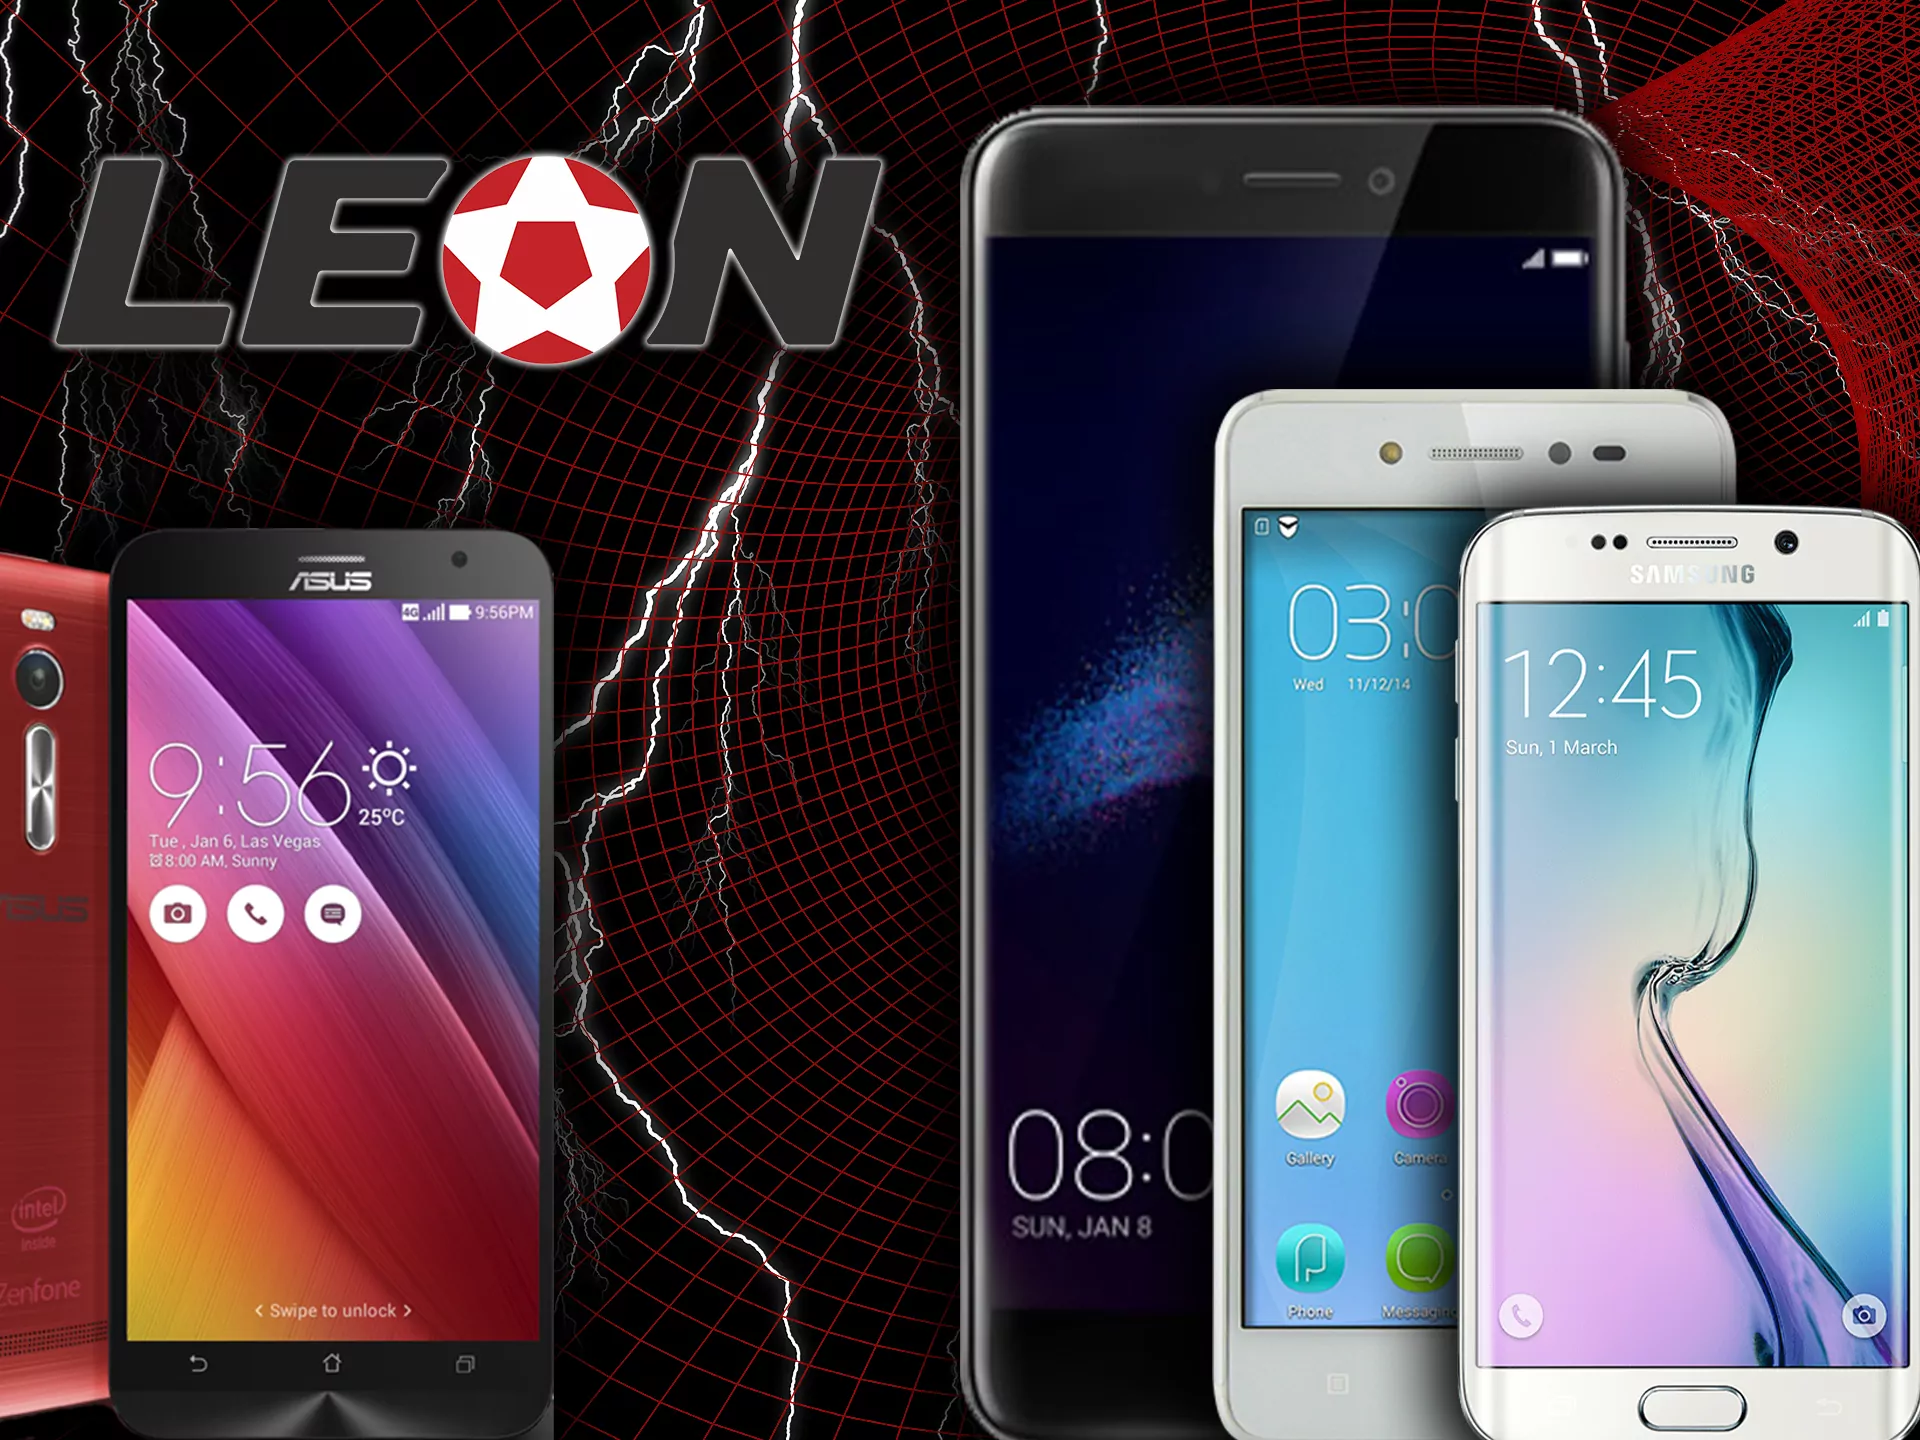 Leon app will run on almost every modern Android device.